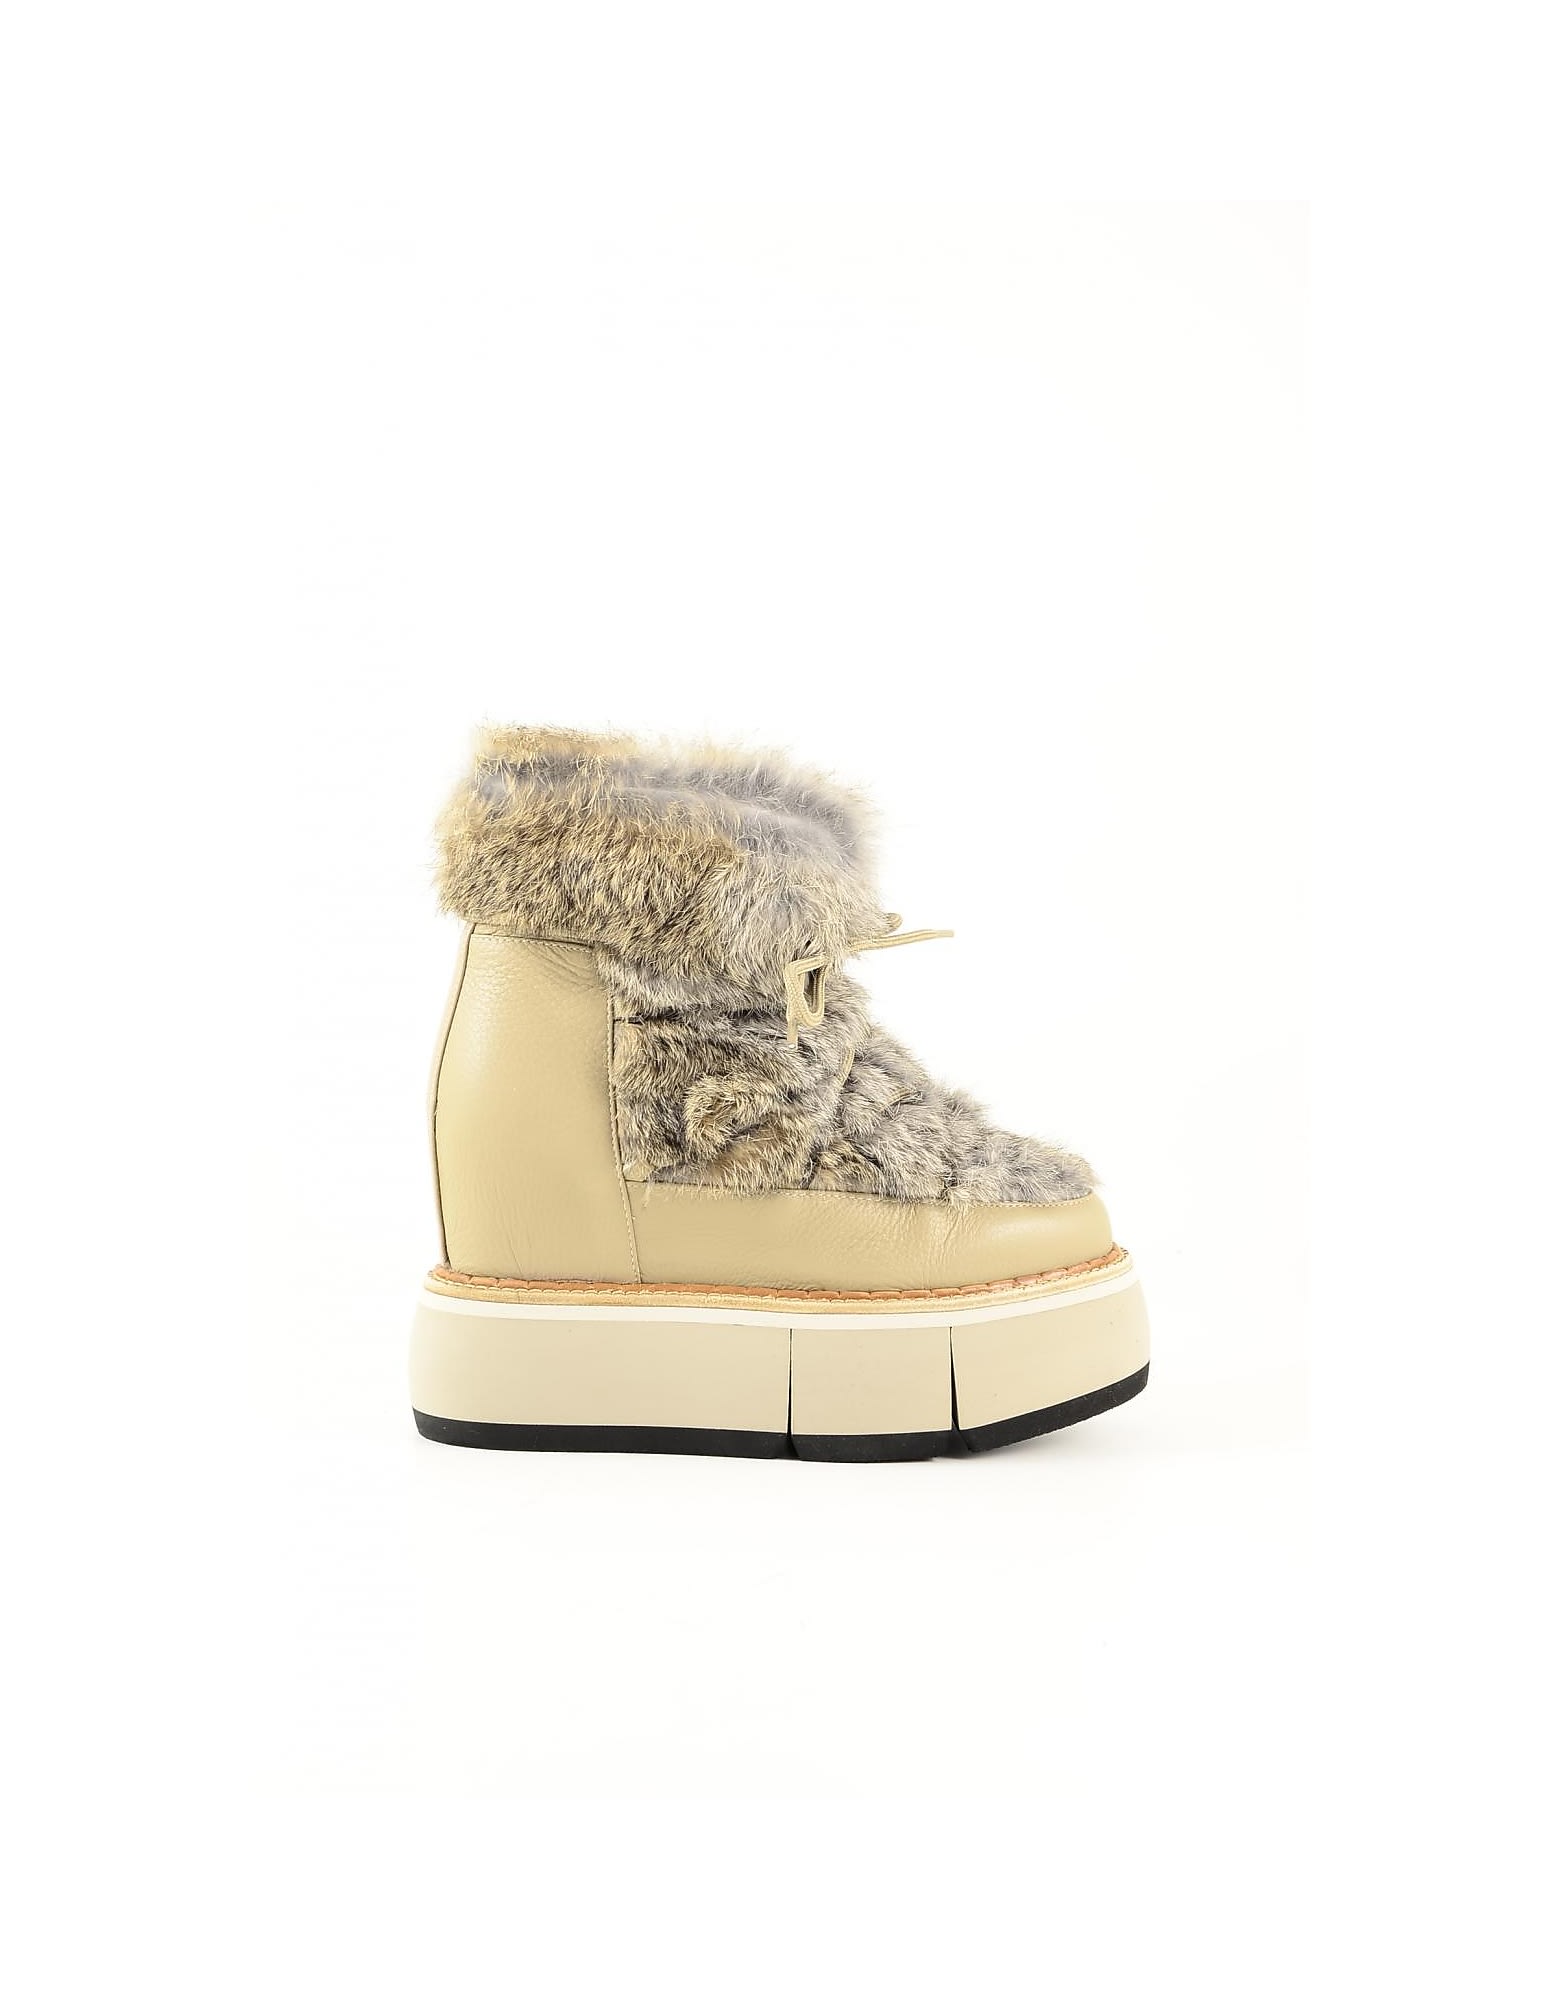 Paloma Barceló Paloma Barcelo Light Taupe Leather And Fur Boots